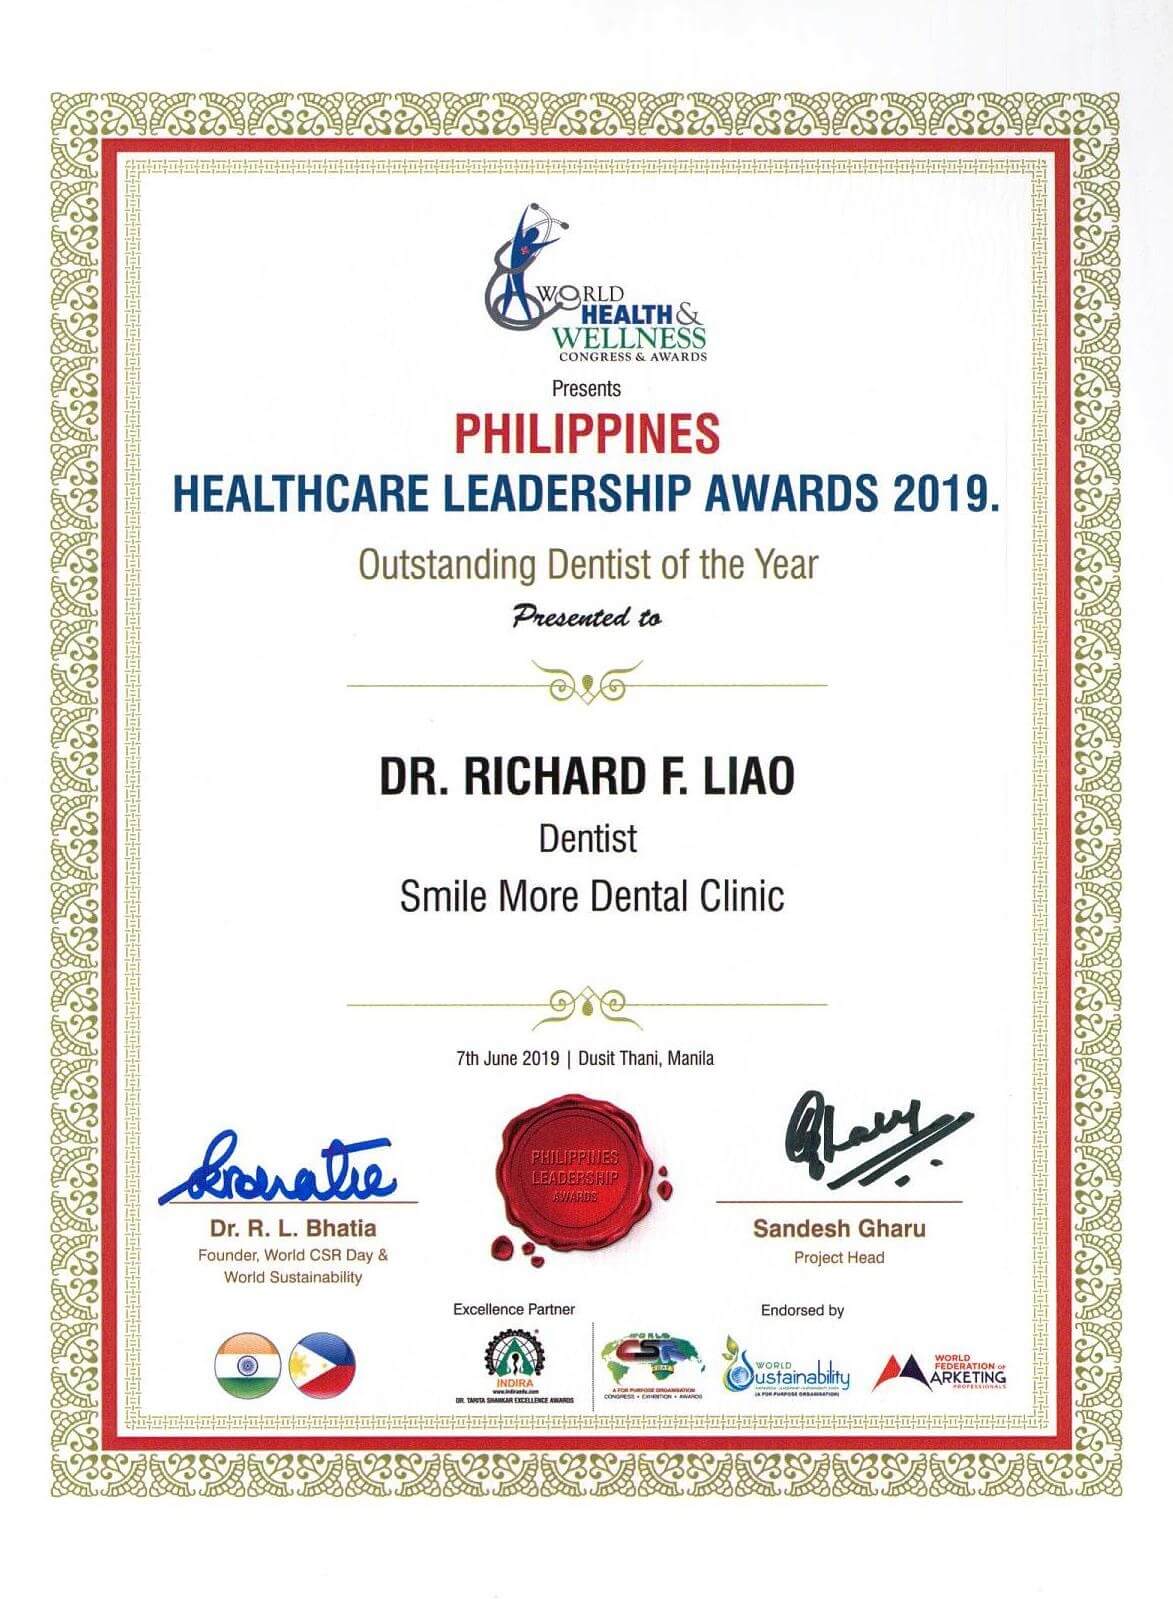 Best Dentist Award for Dr. Richard F. Liao -- the fruit of our unwavering commitment for dental excellence!